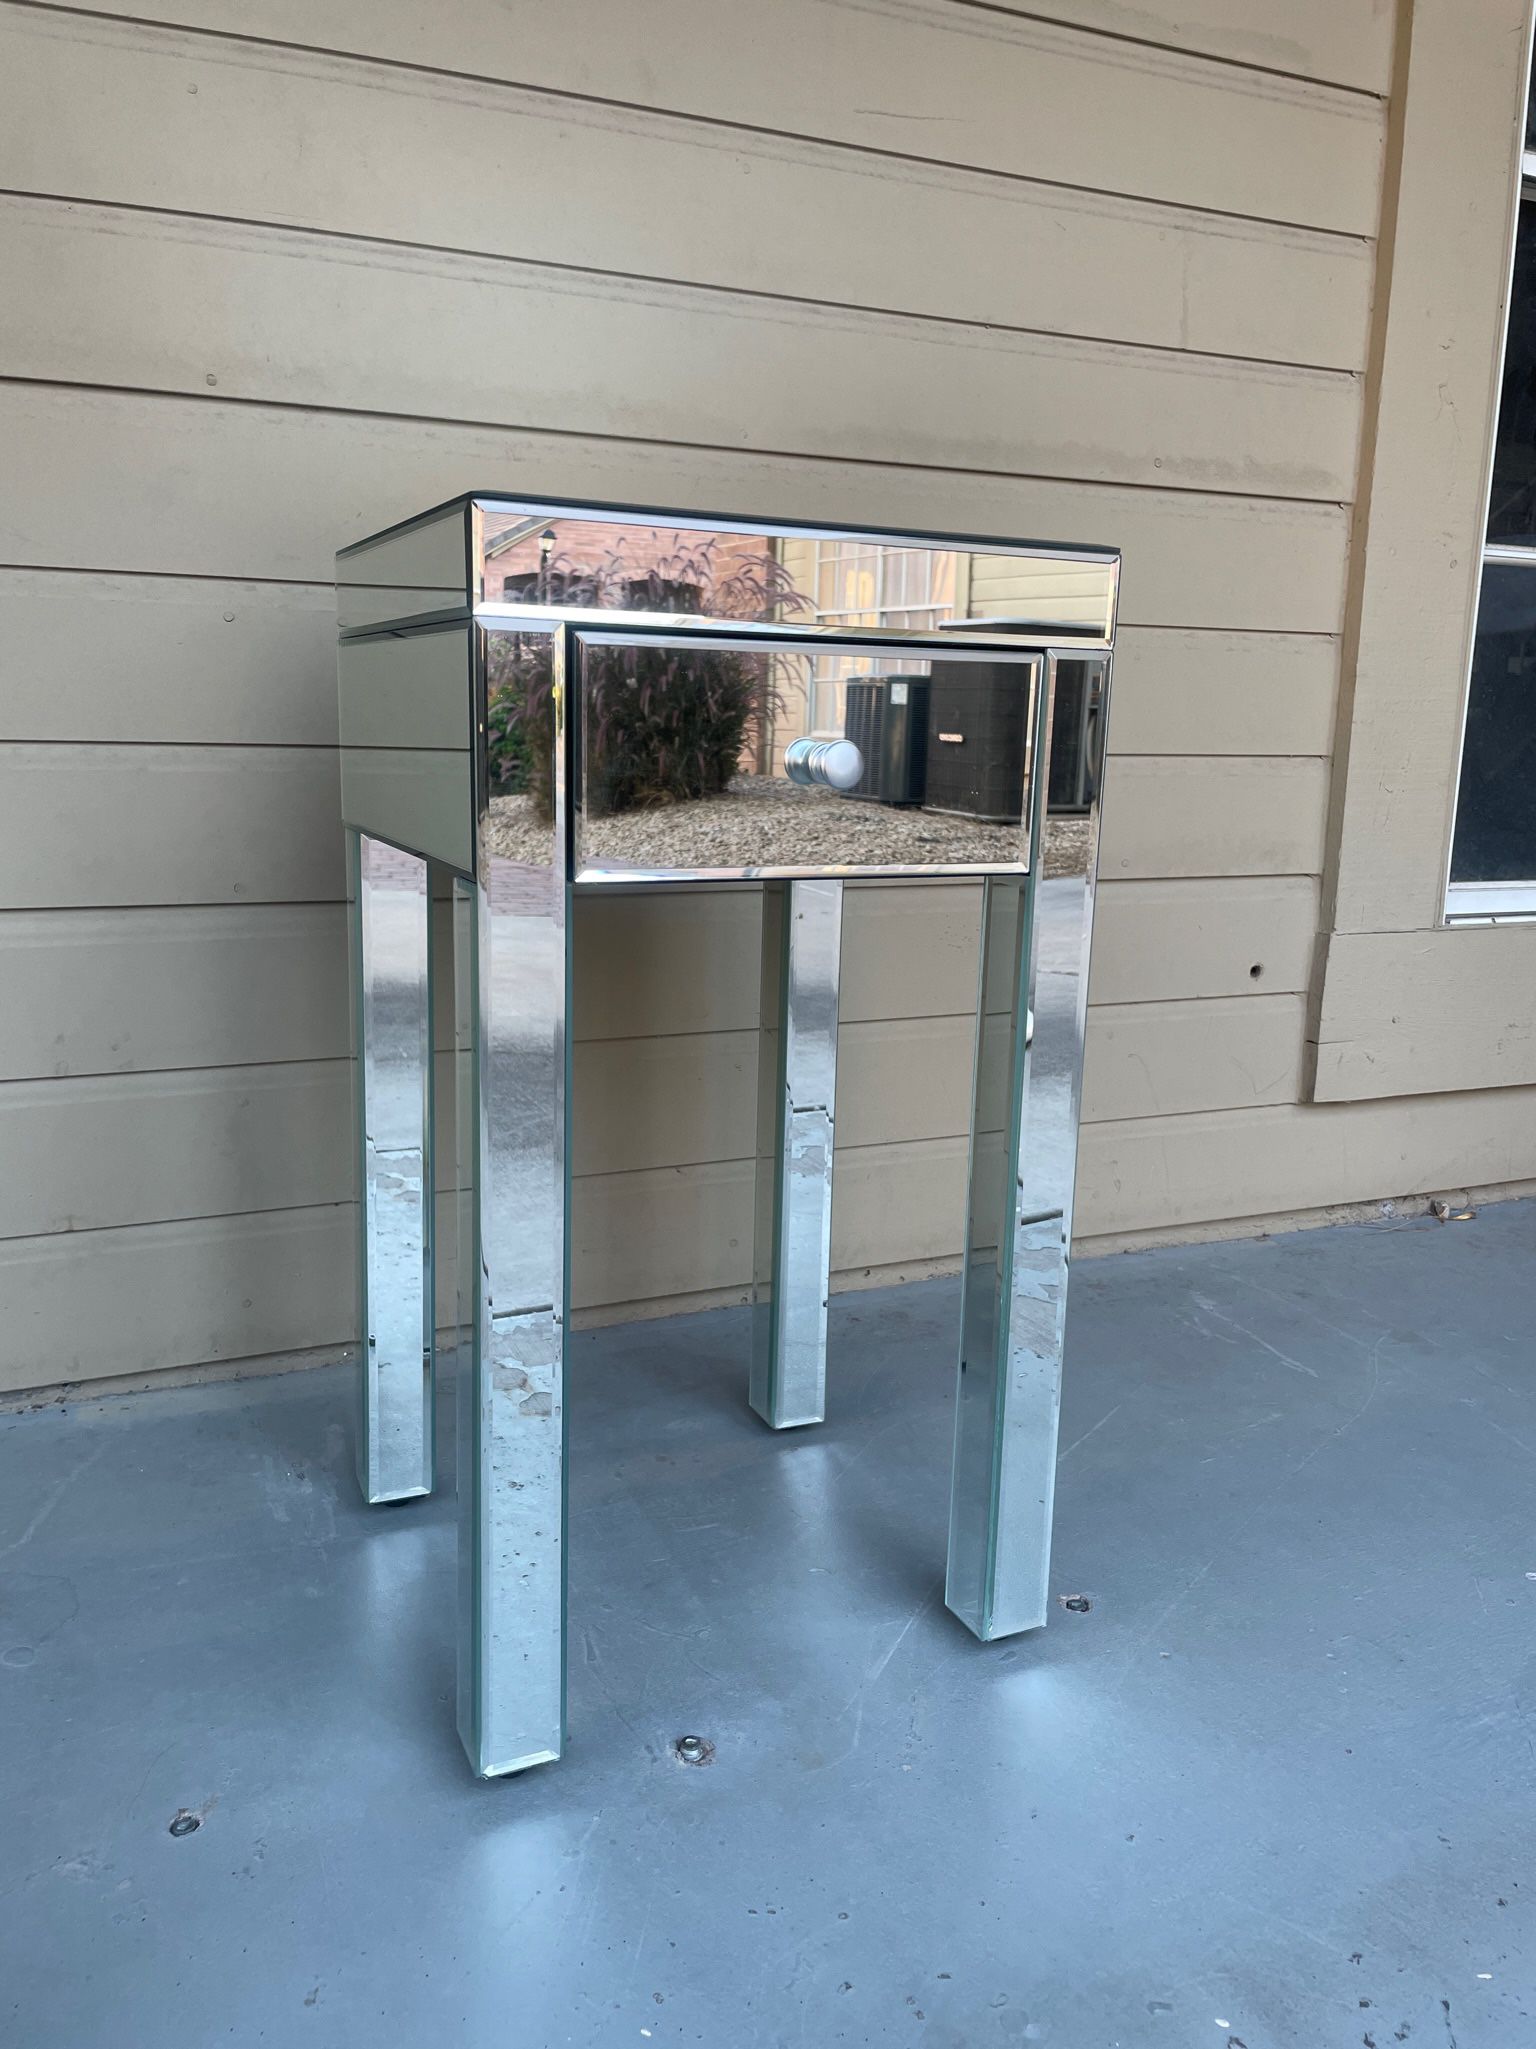 Mirrored Accent Table / Nightstand 